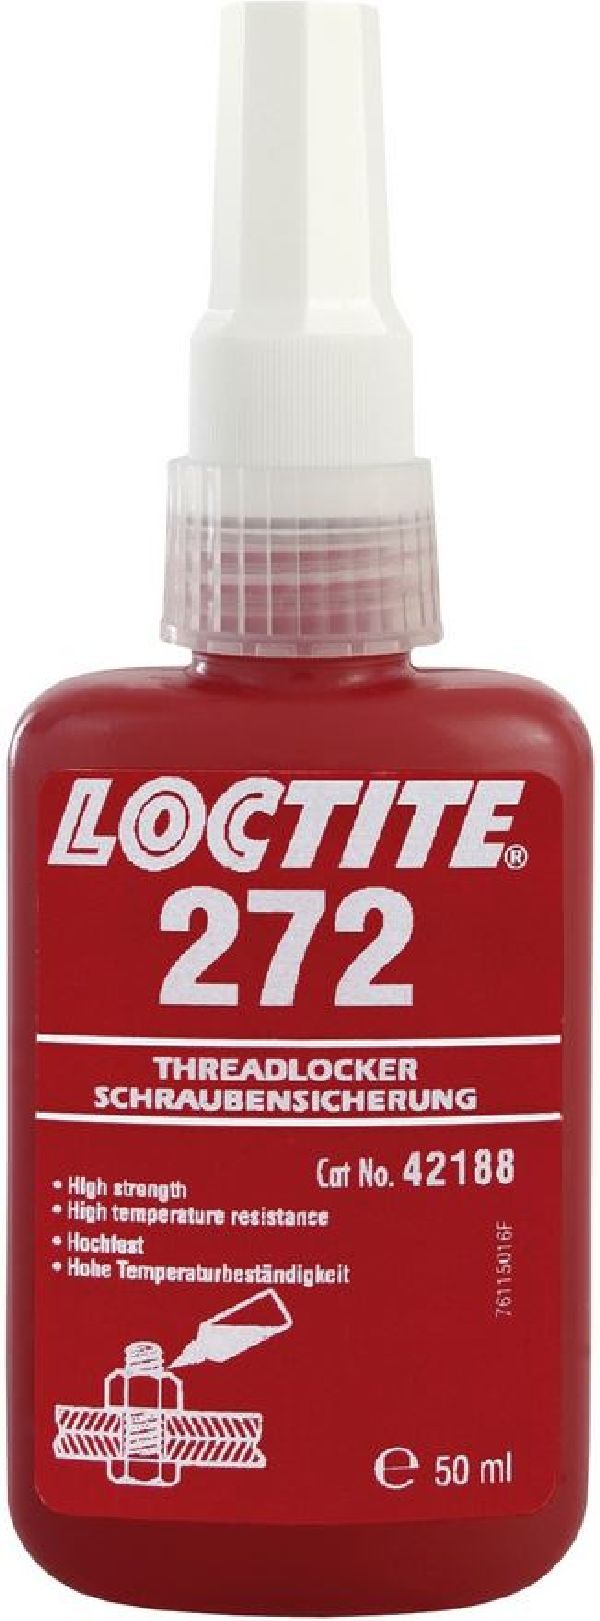 Loctite 272 Bouteille  50 ml (Emb. 12)